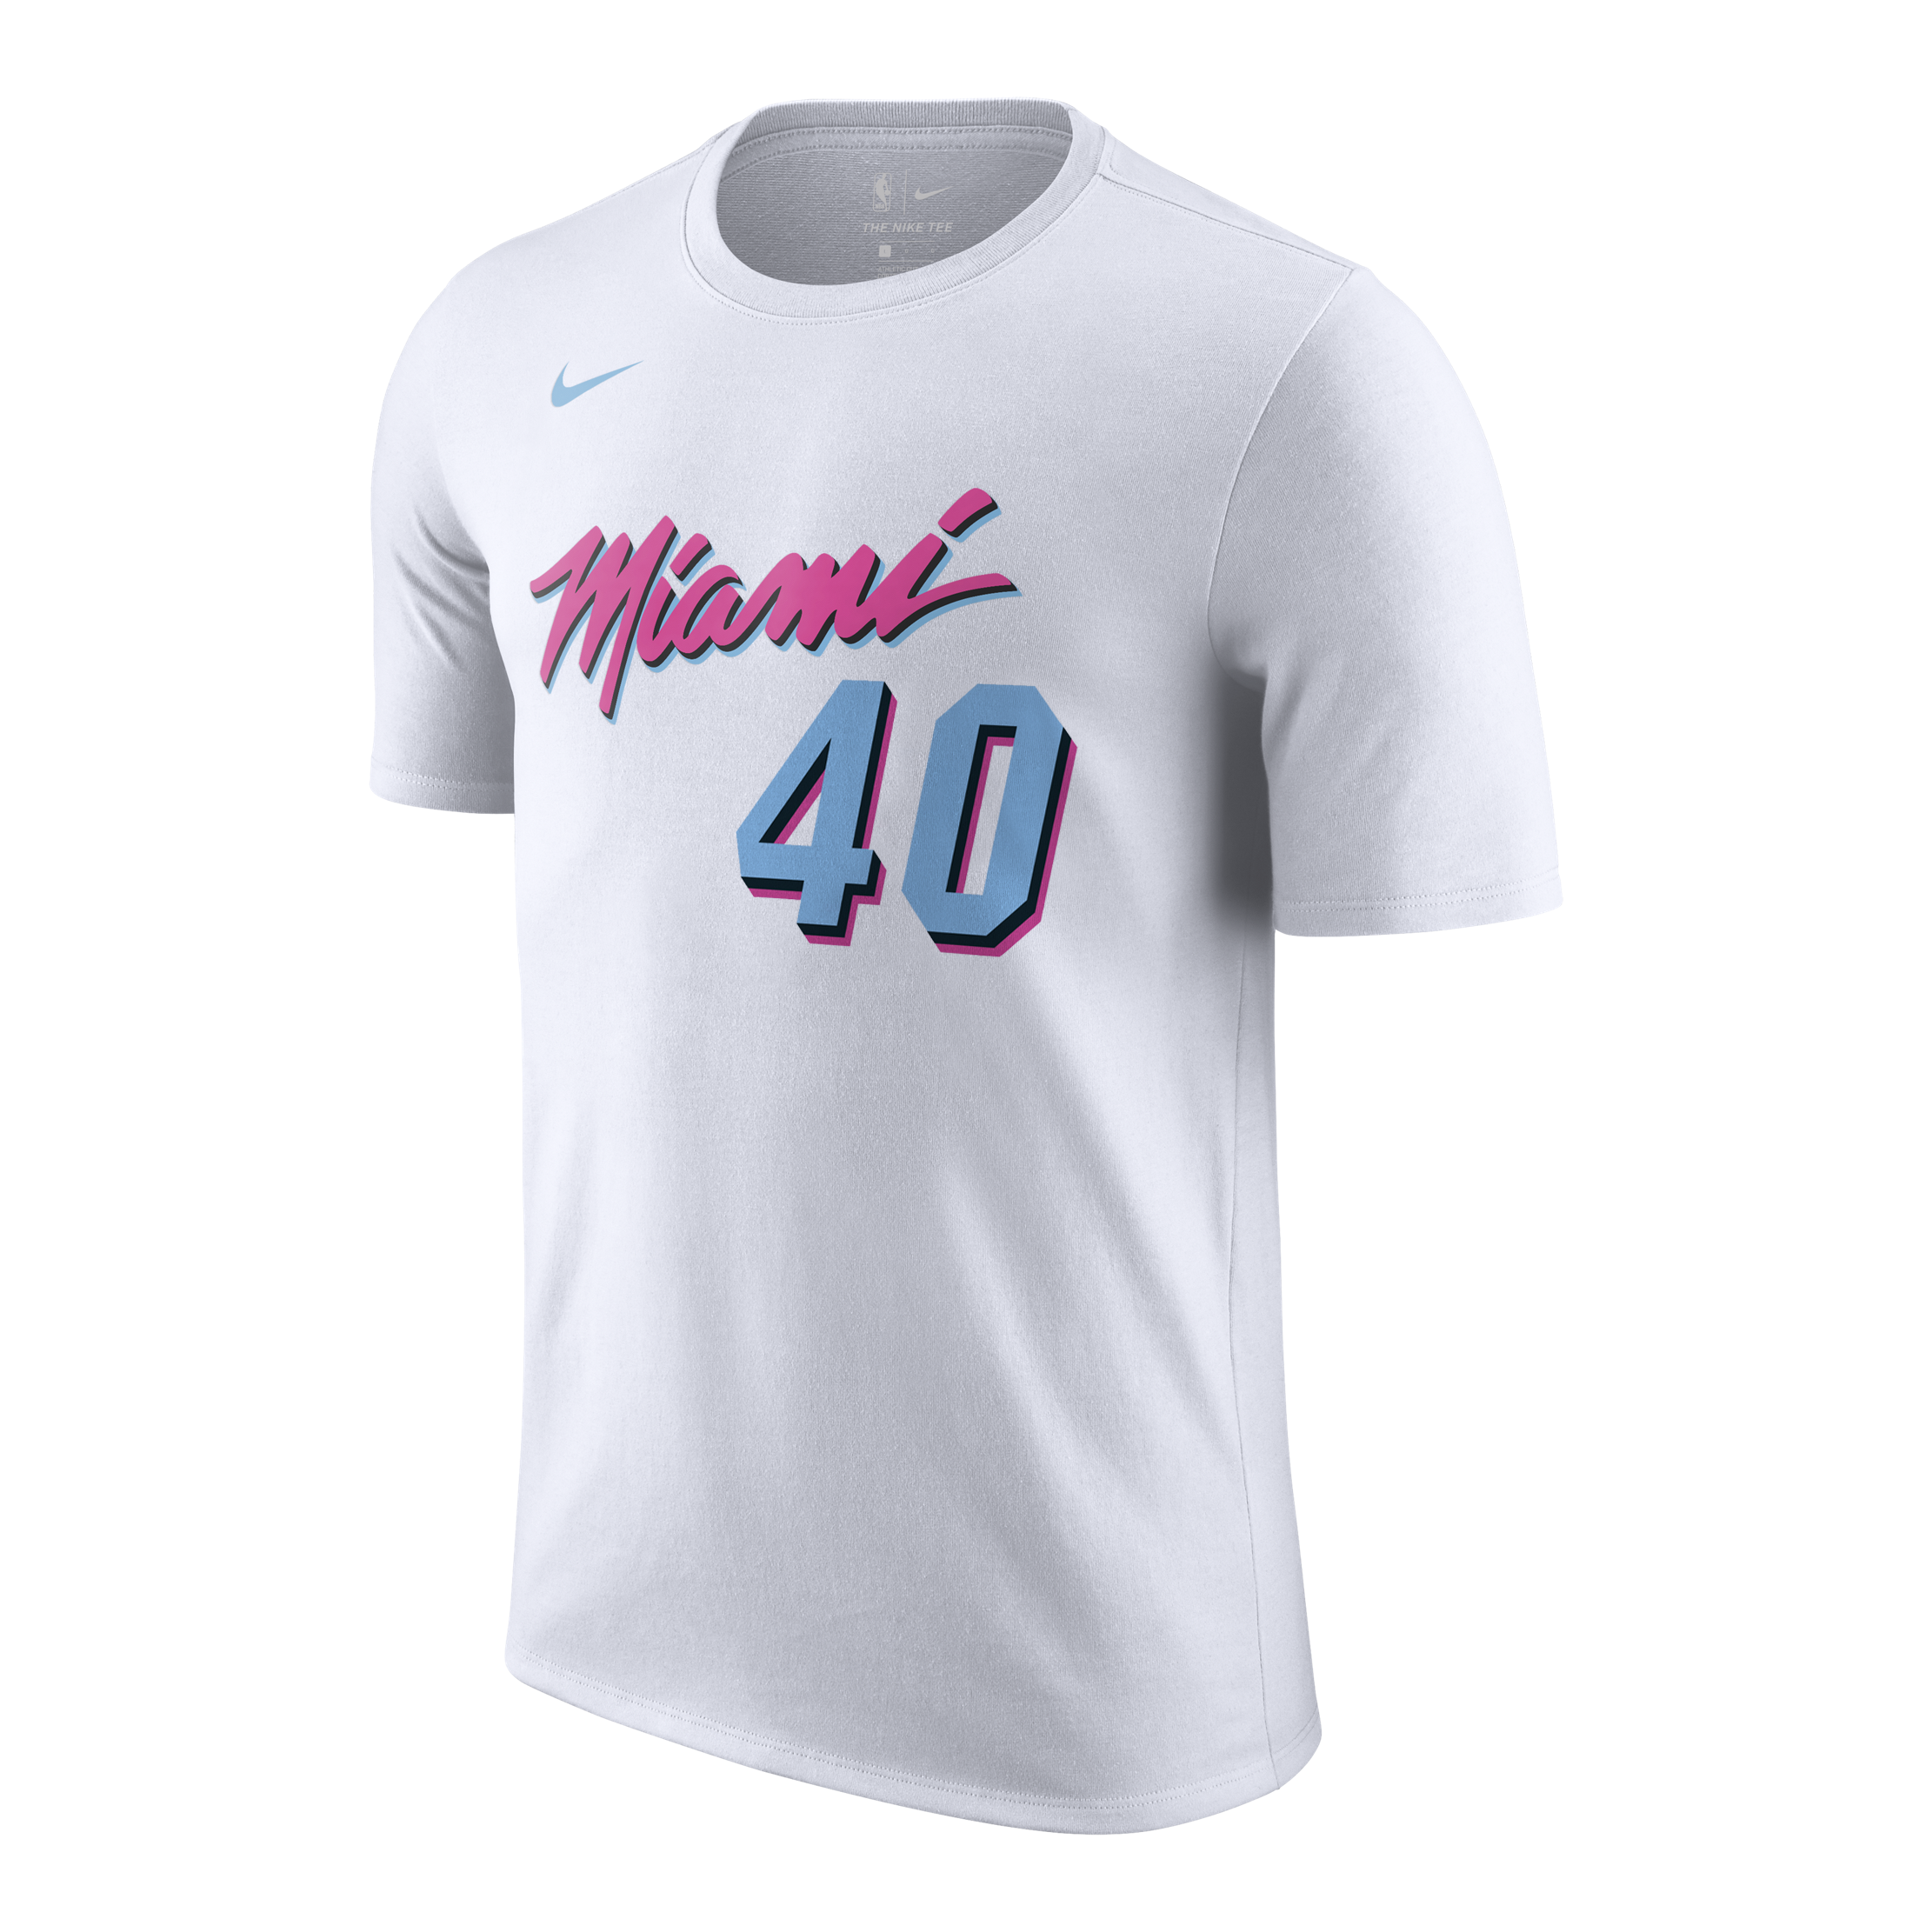 udonis haslem miami vice jersey